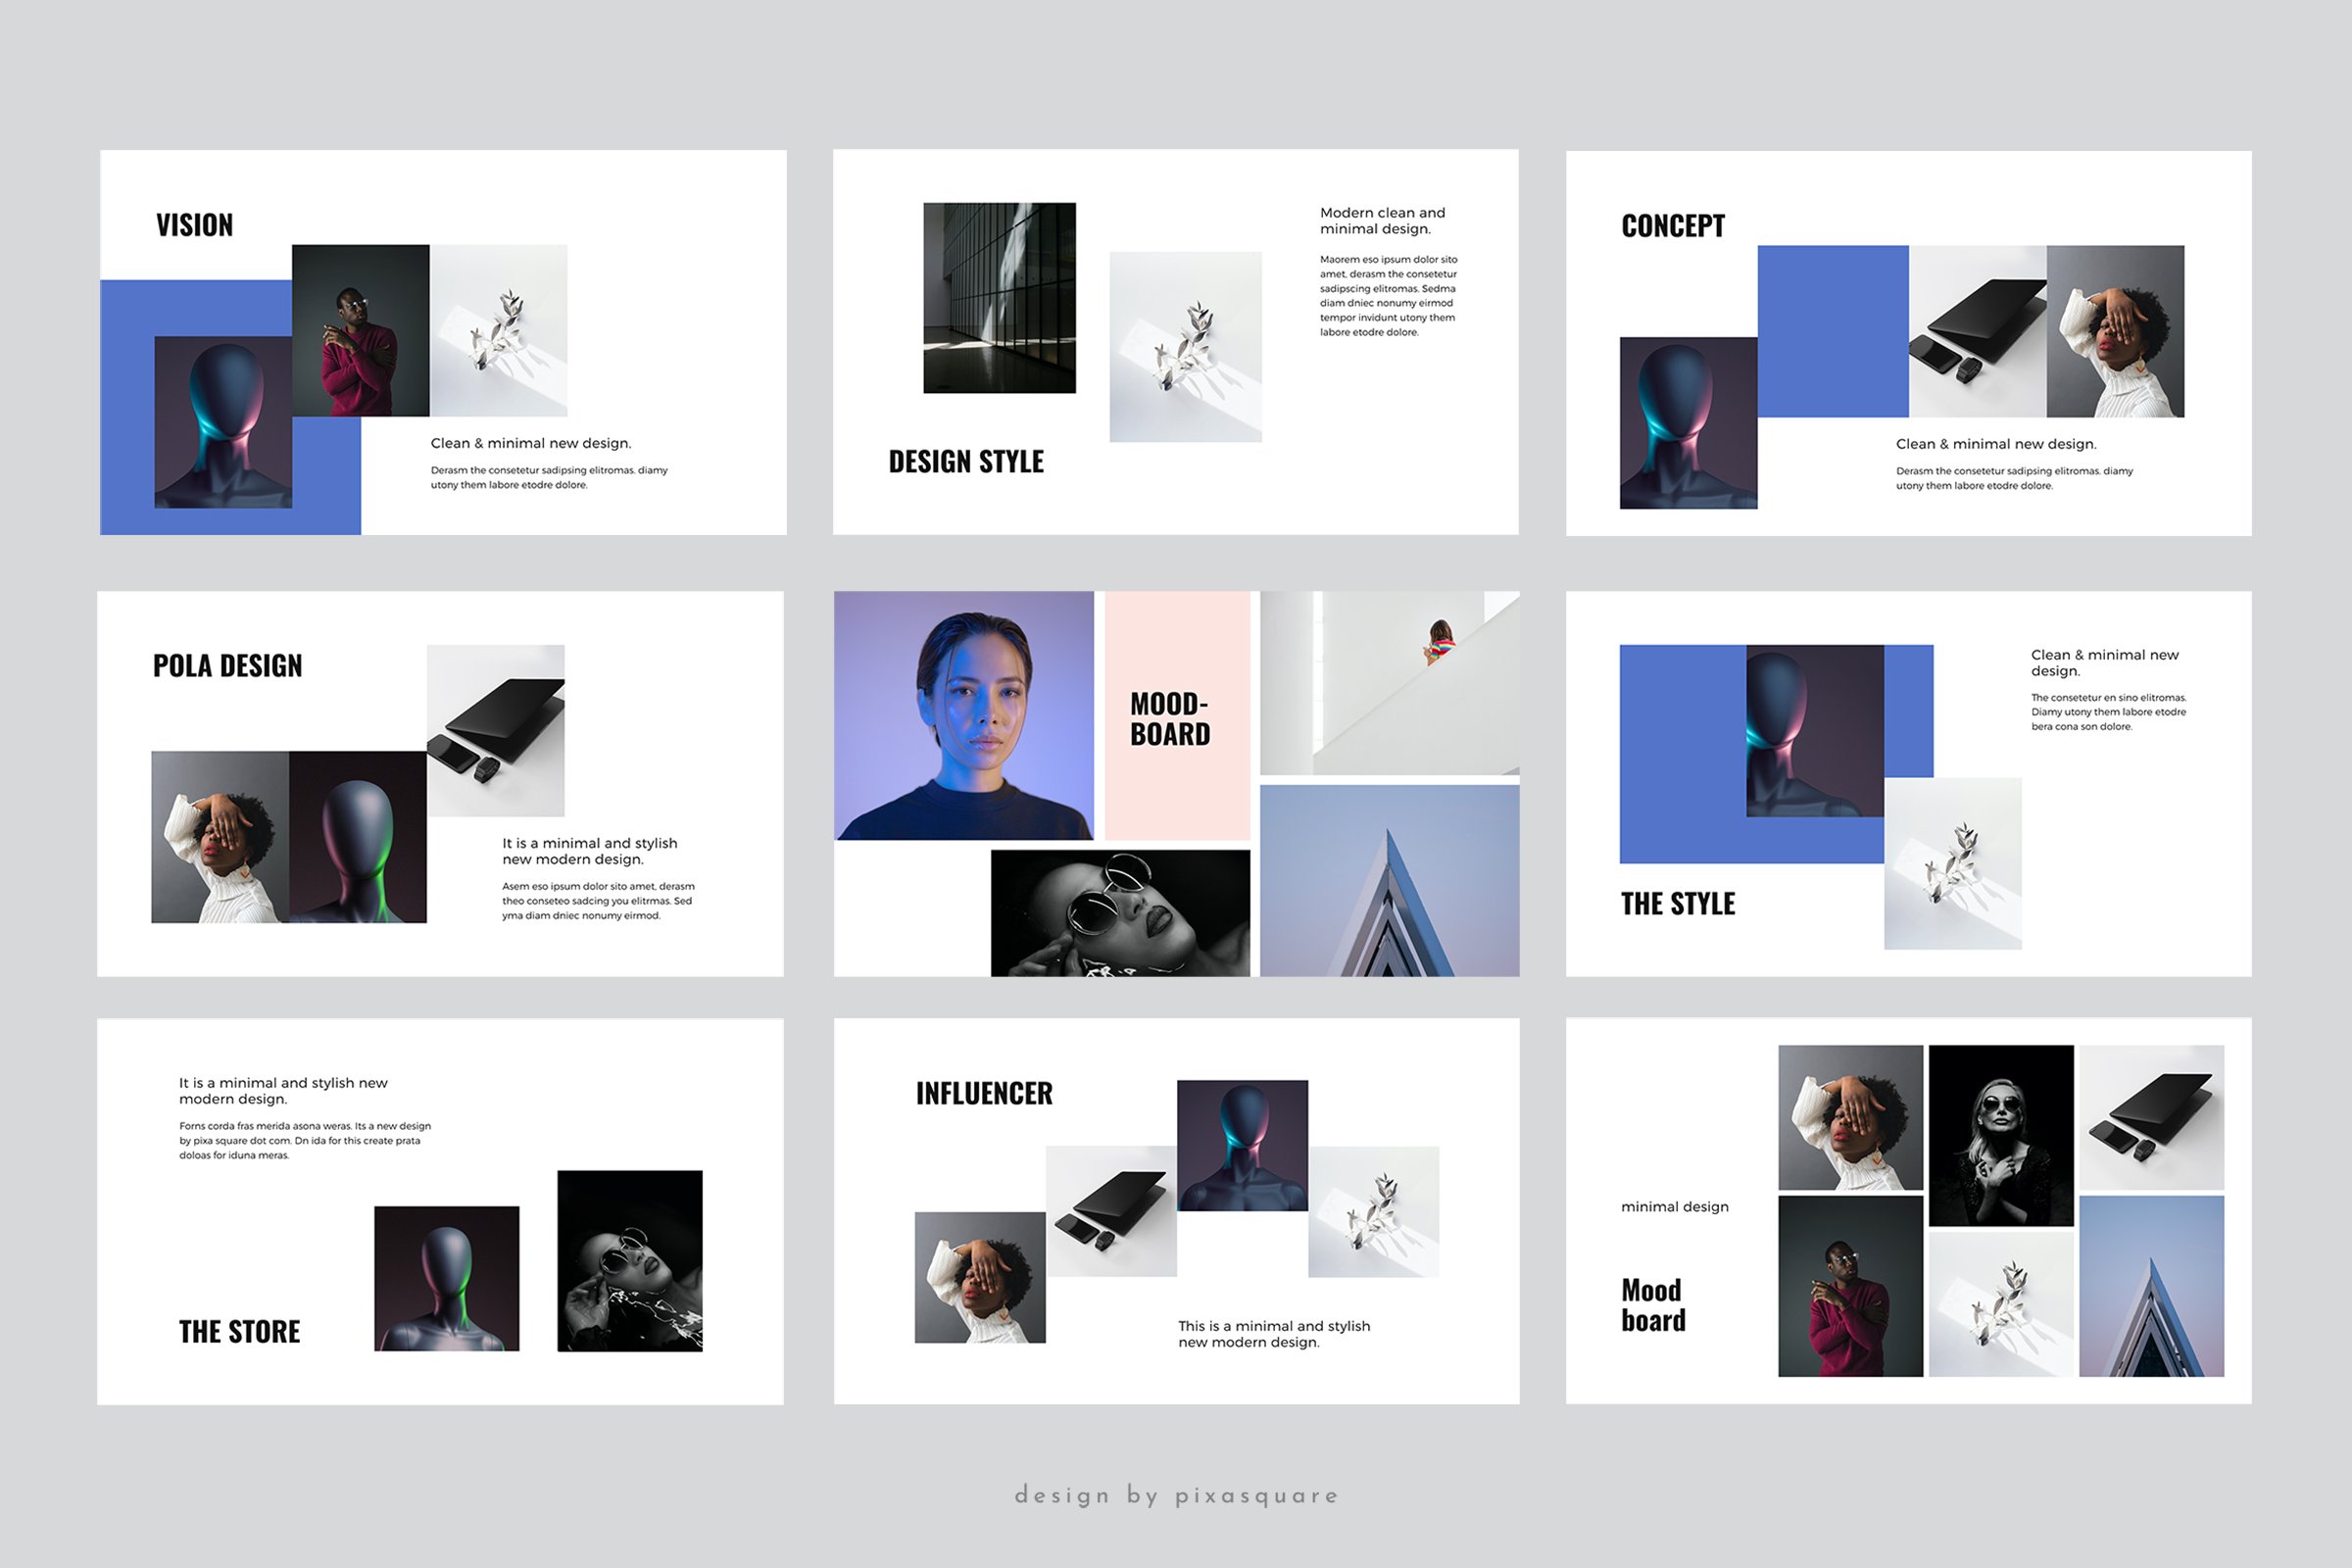 Light template with interesting geometric shapes for images.